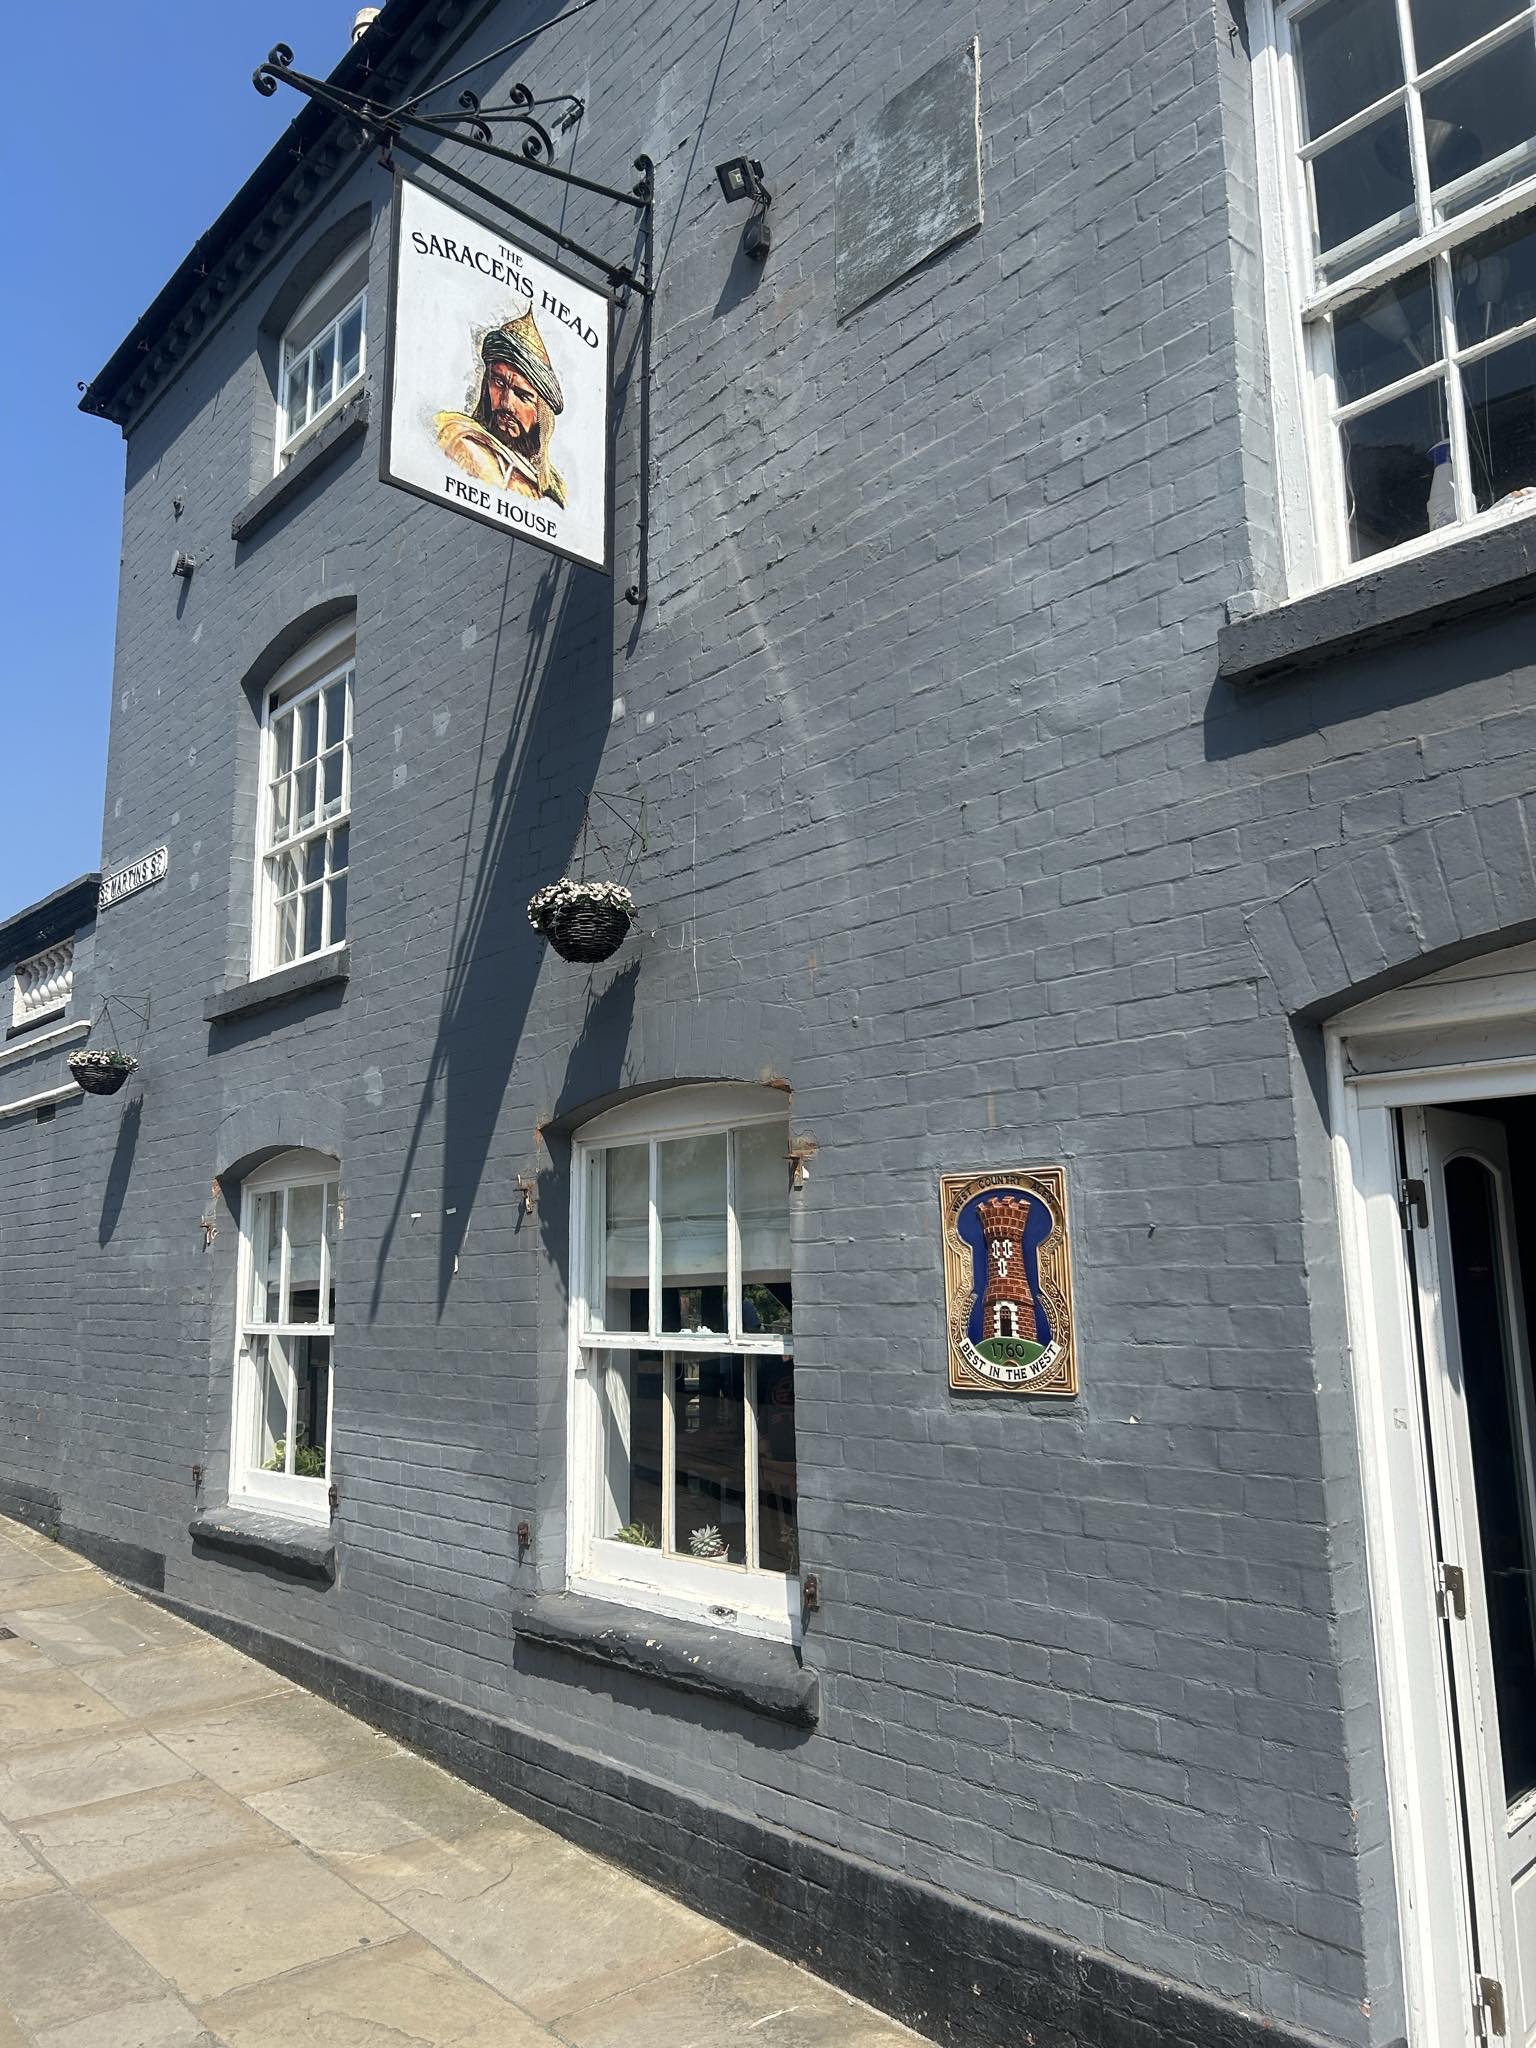 NEWS | A popular Hereford pub reopened its doors at the weekend under new management 